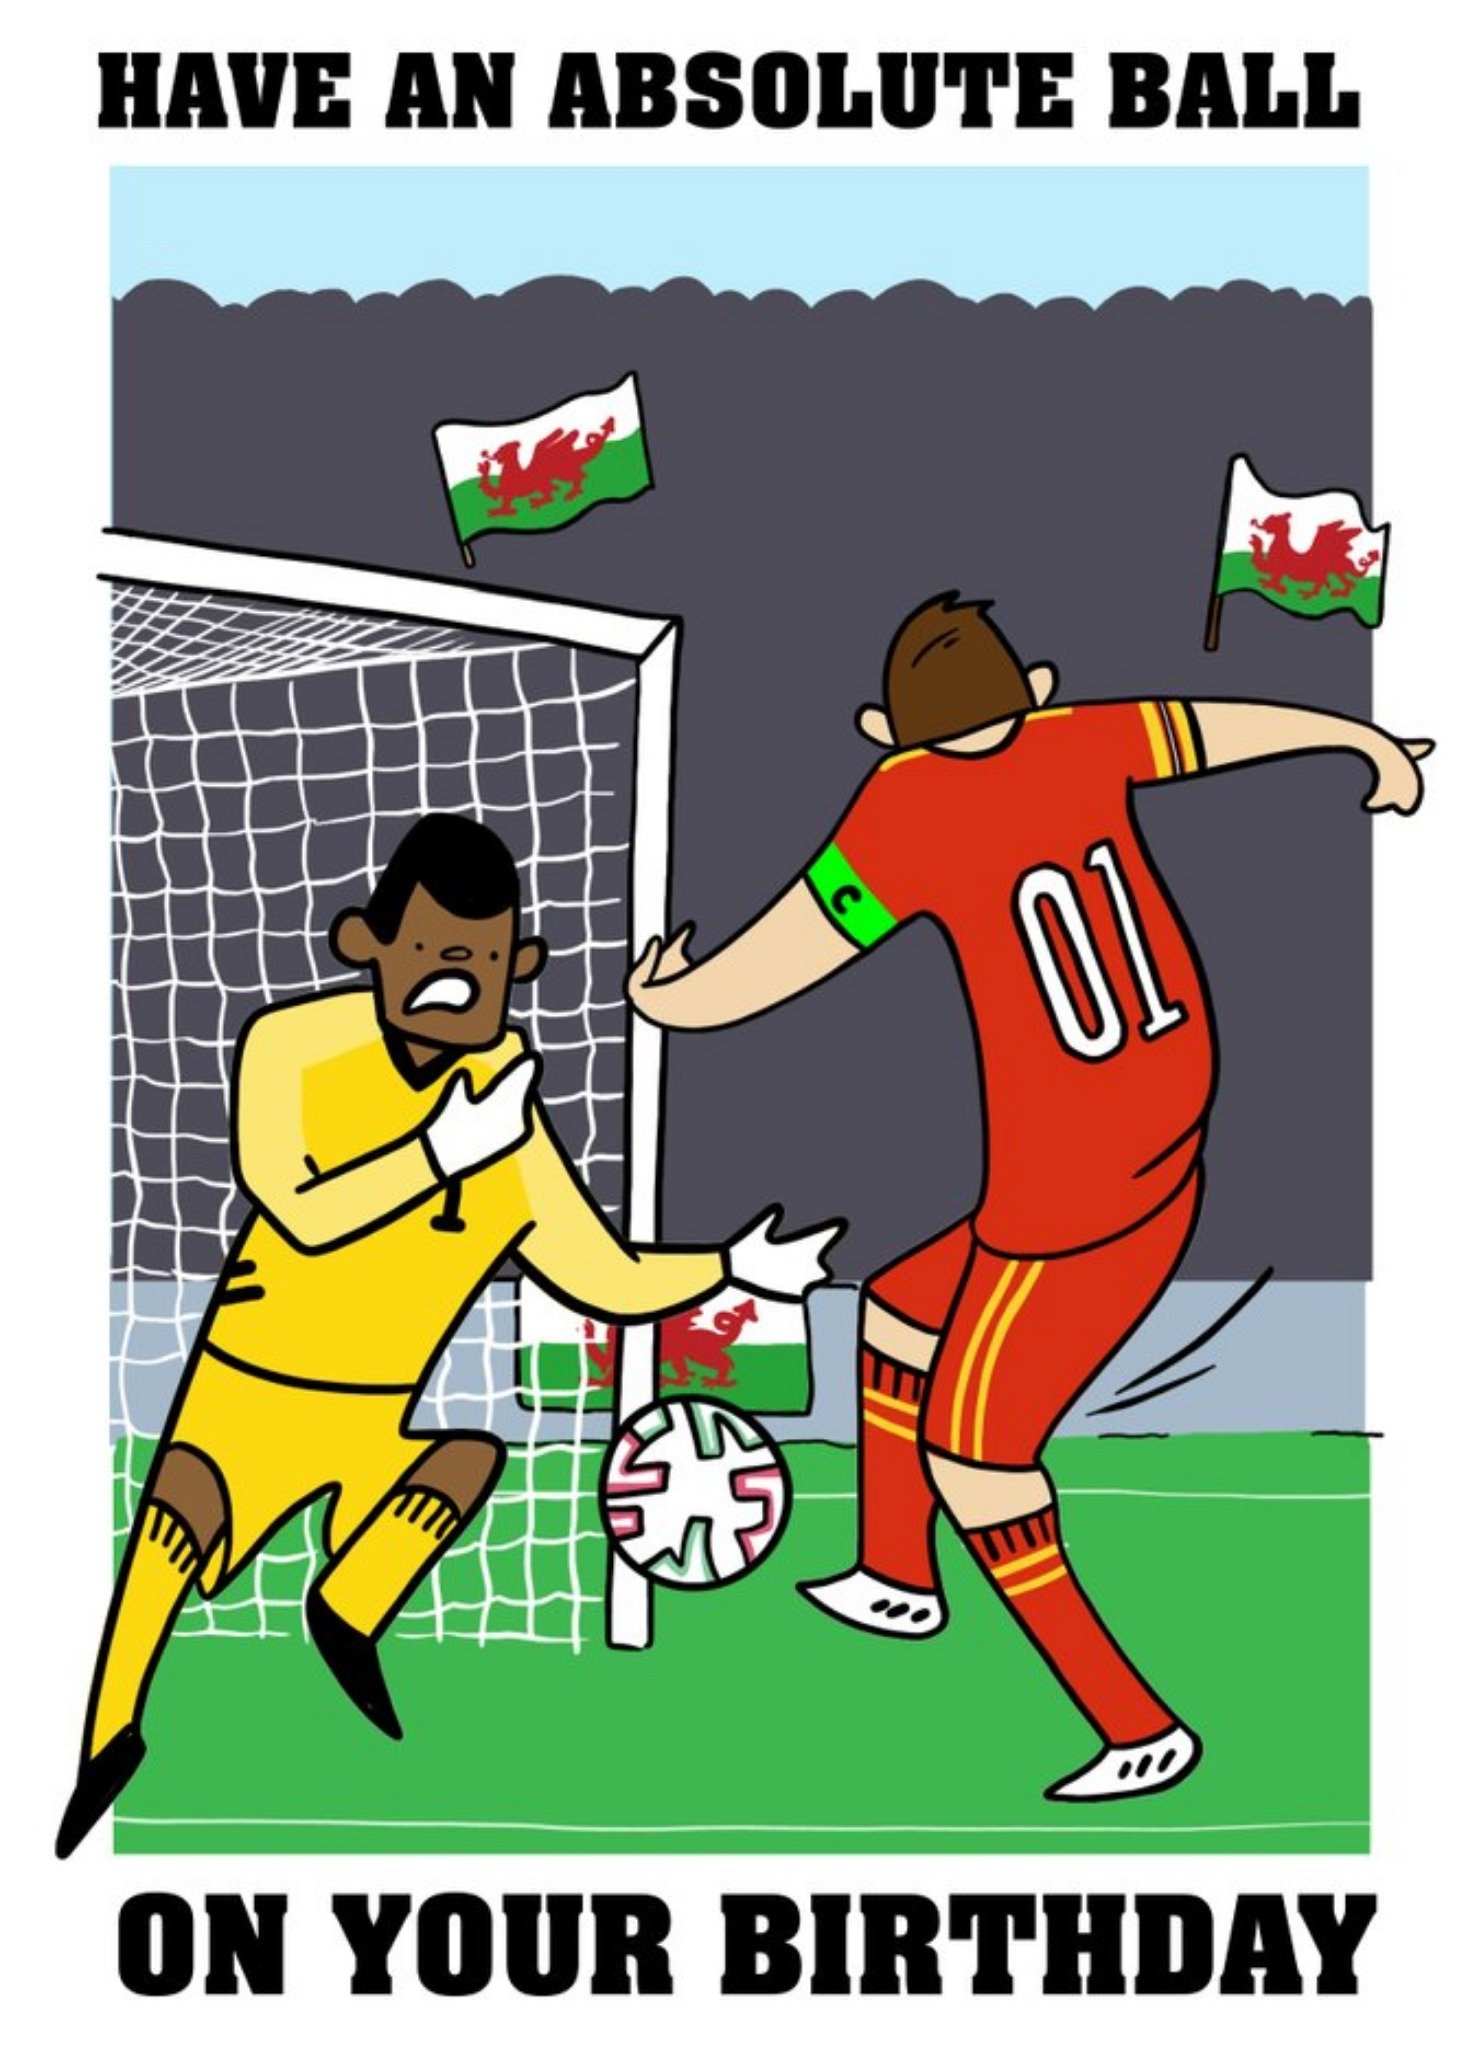 Moonpig Wales Footballer Have An Absolute Ball Birthday Card, Large